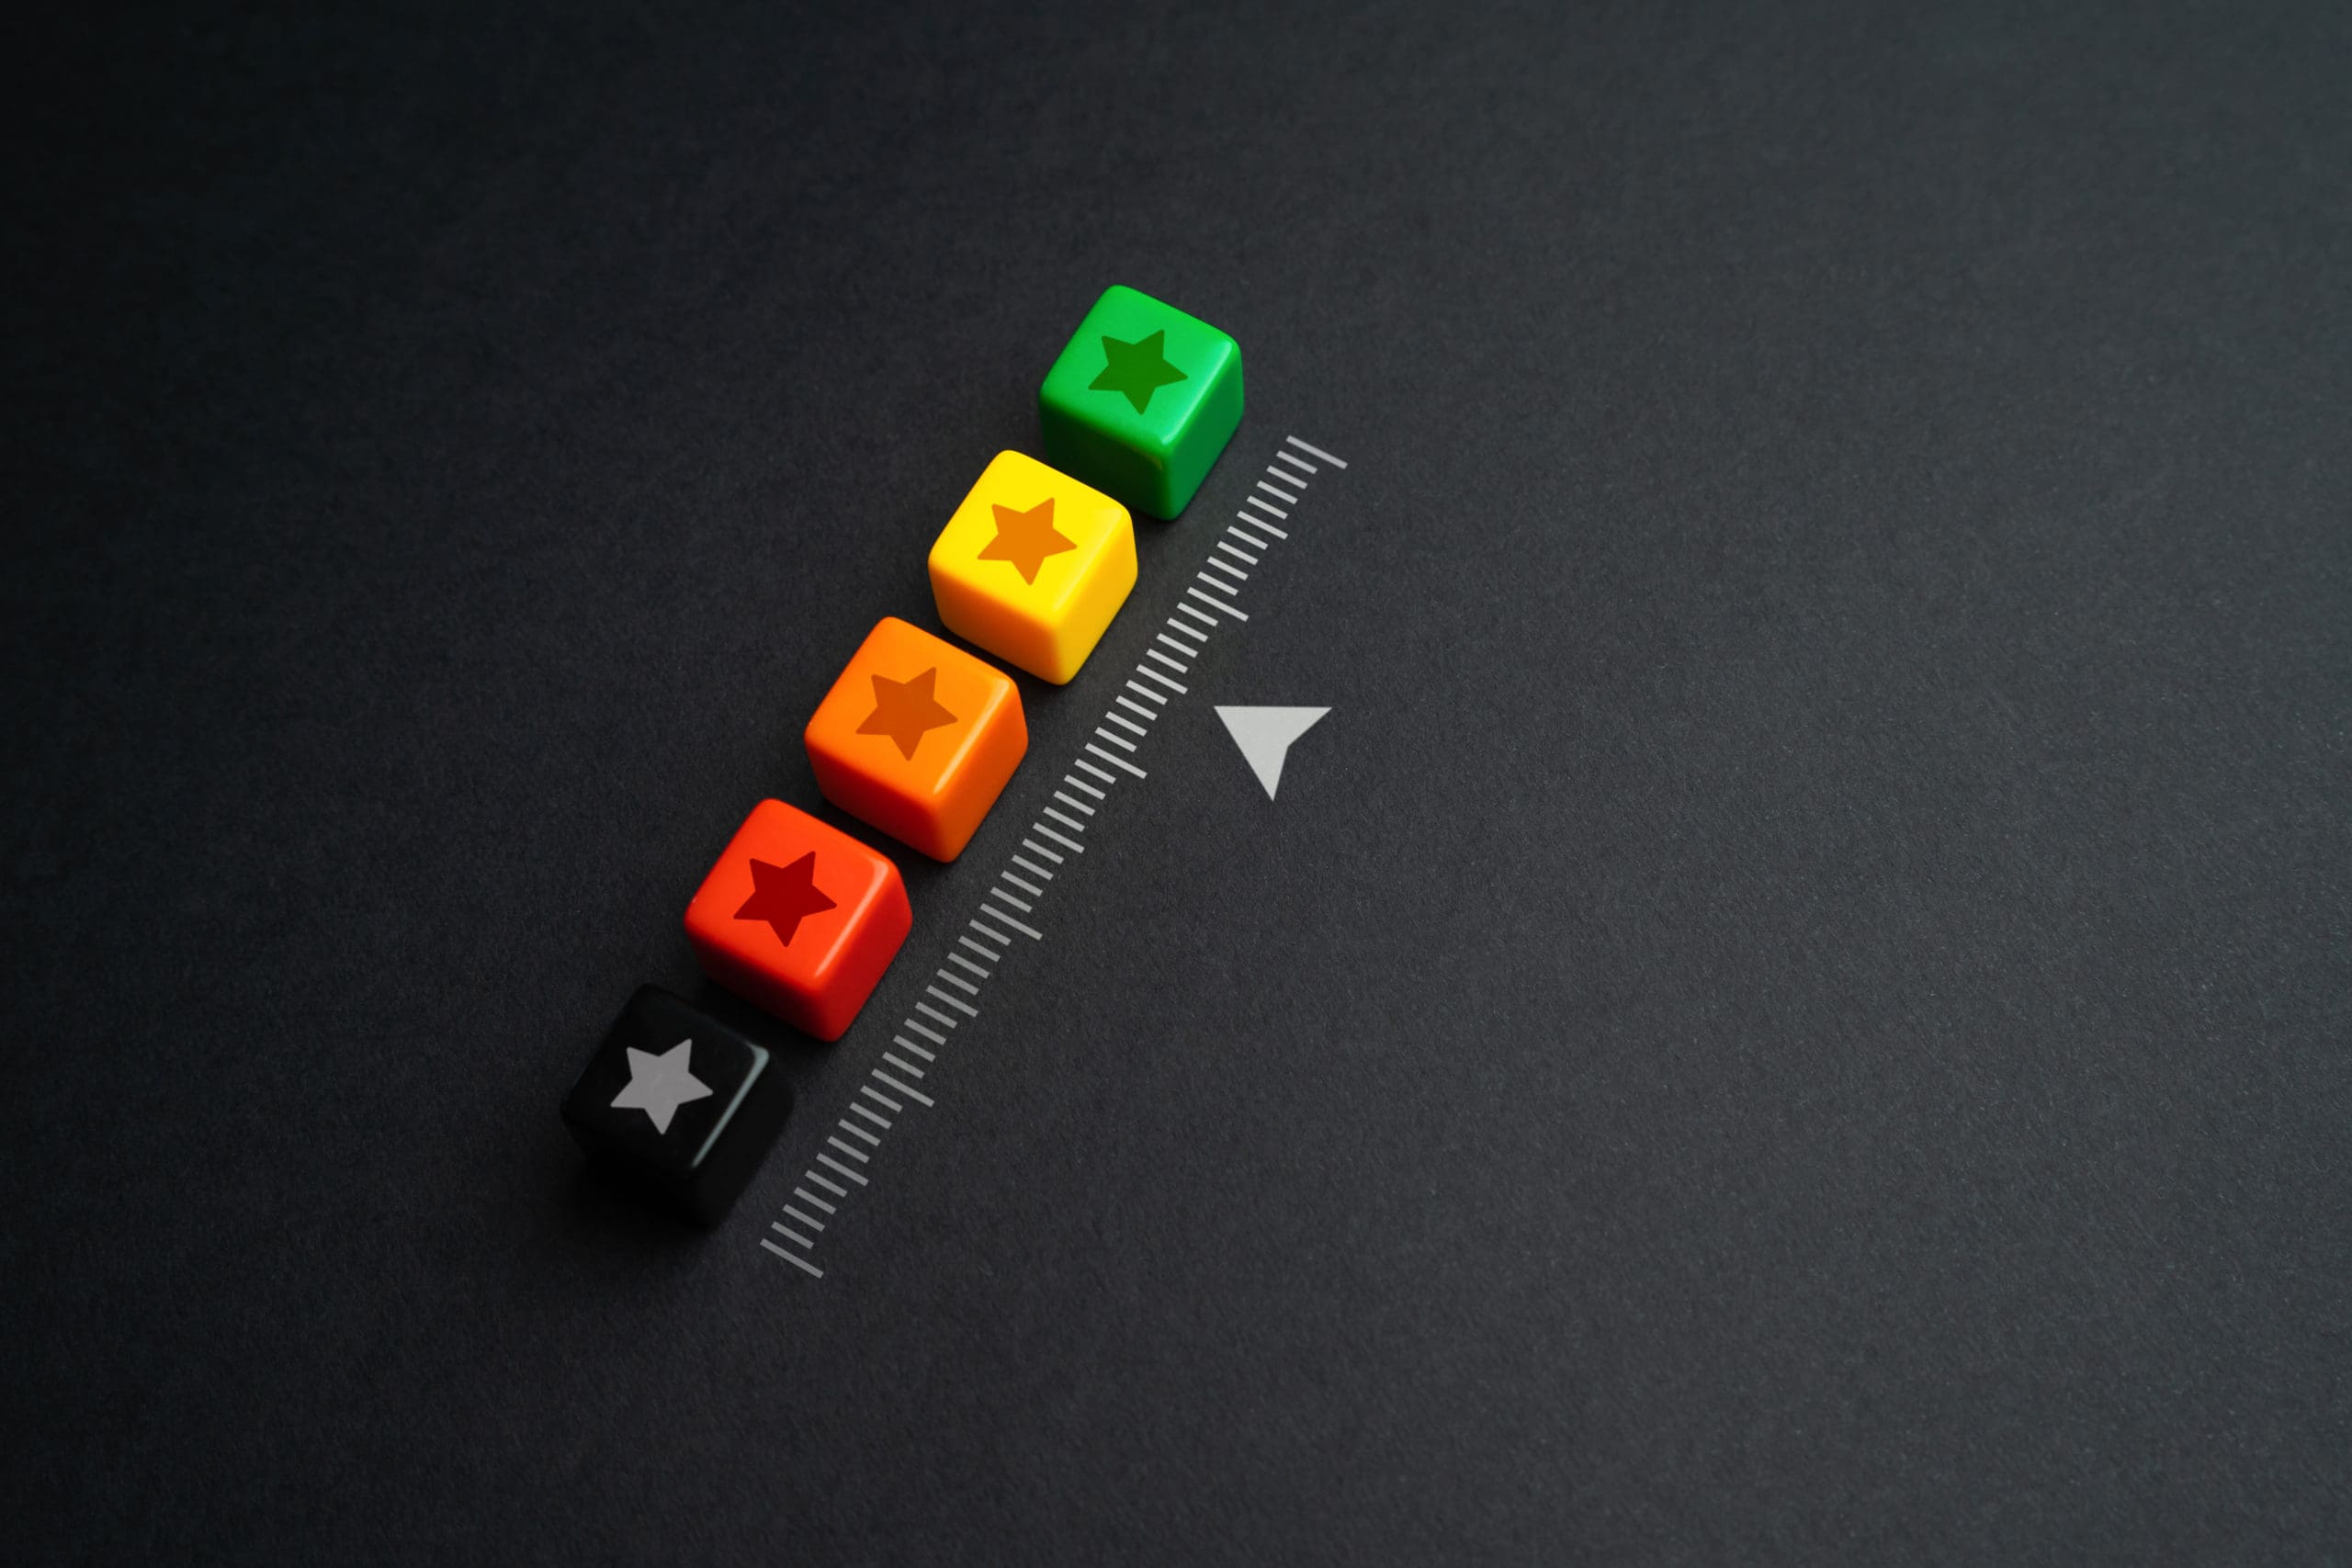 A row of colorful buttons on a black background.